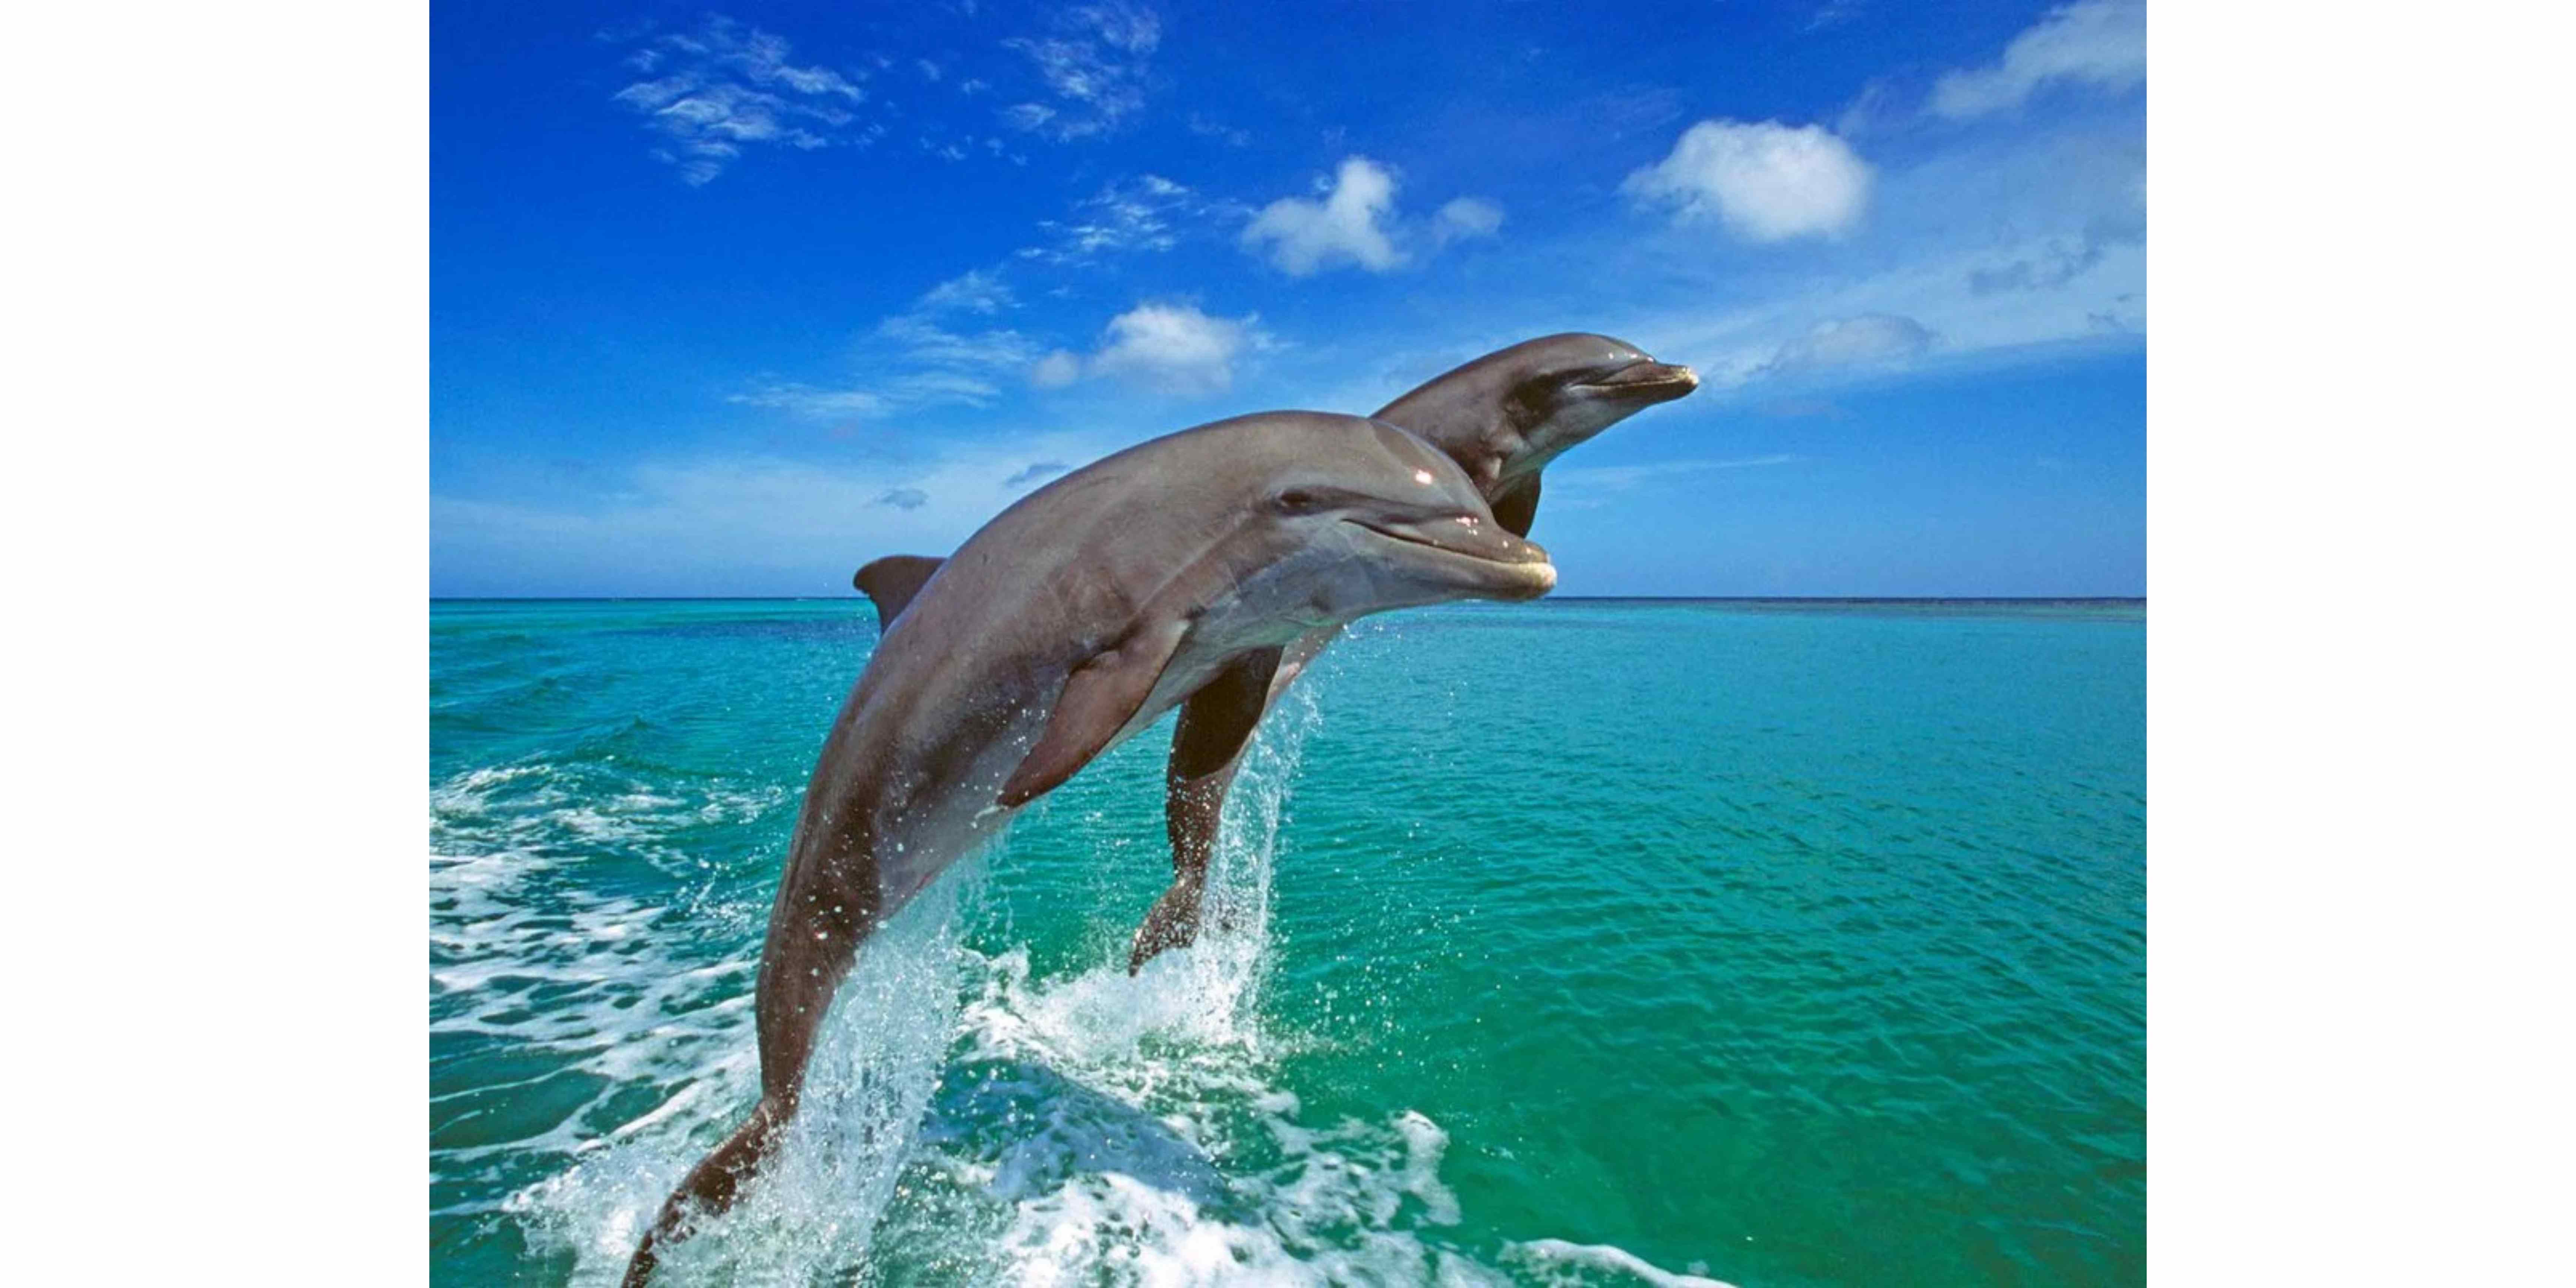 Two dolphins leap into the sea